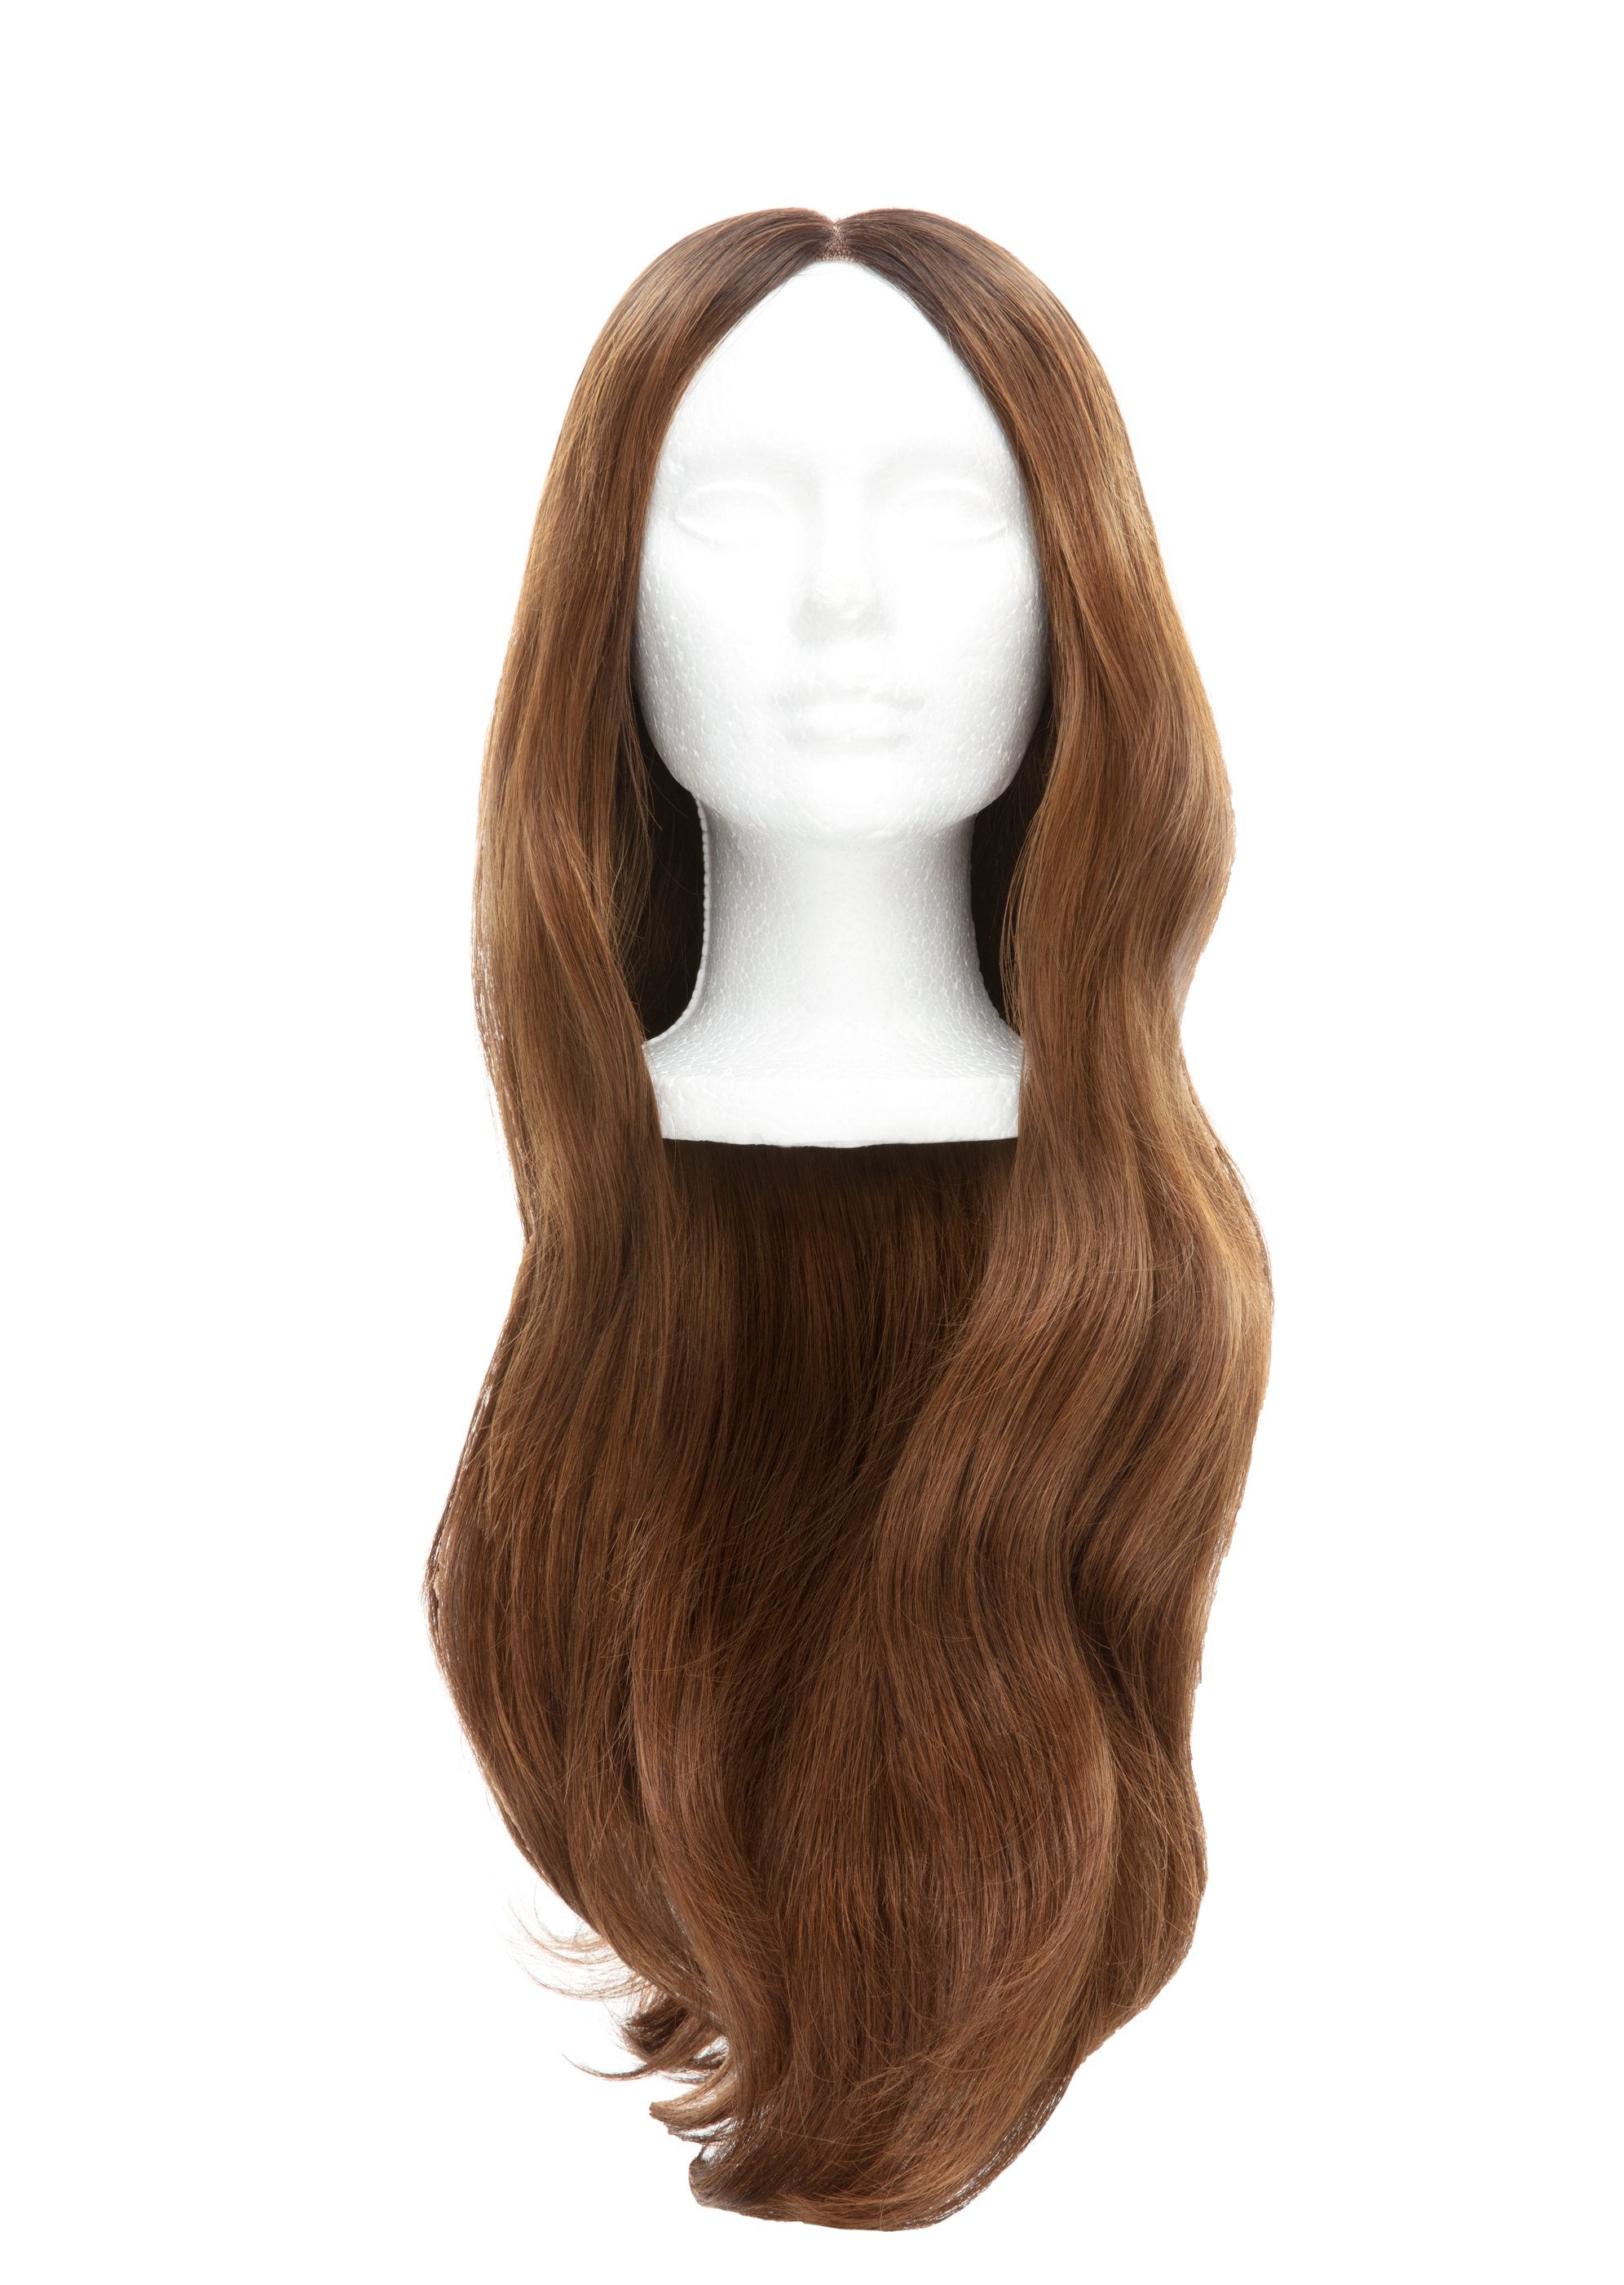 Glam Seamless: Did someone say 25% off U-Part wigs?